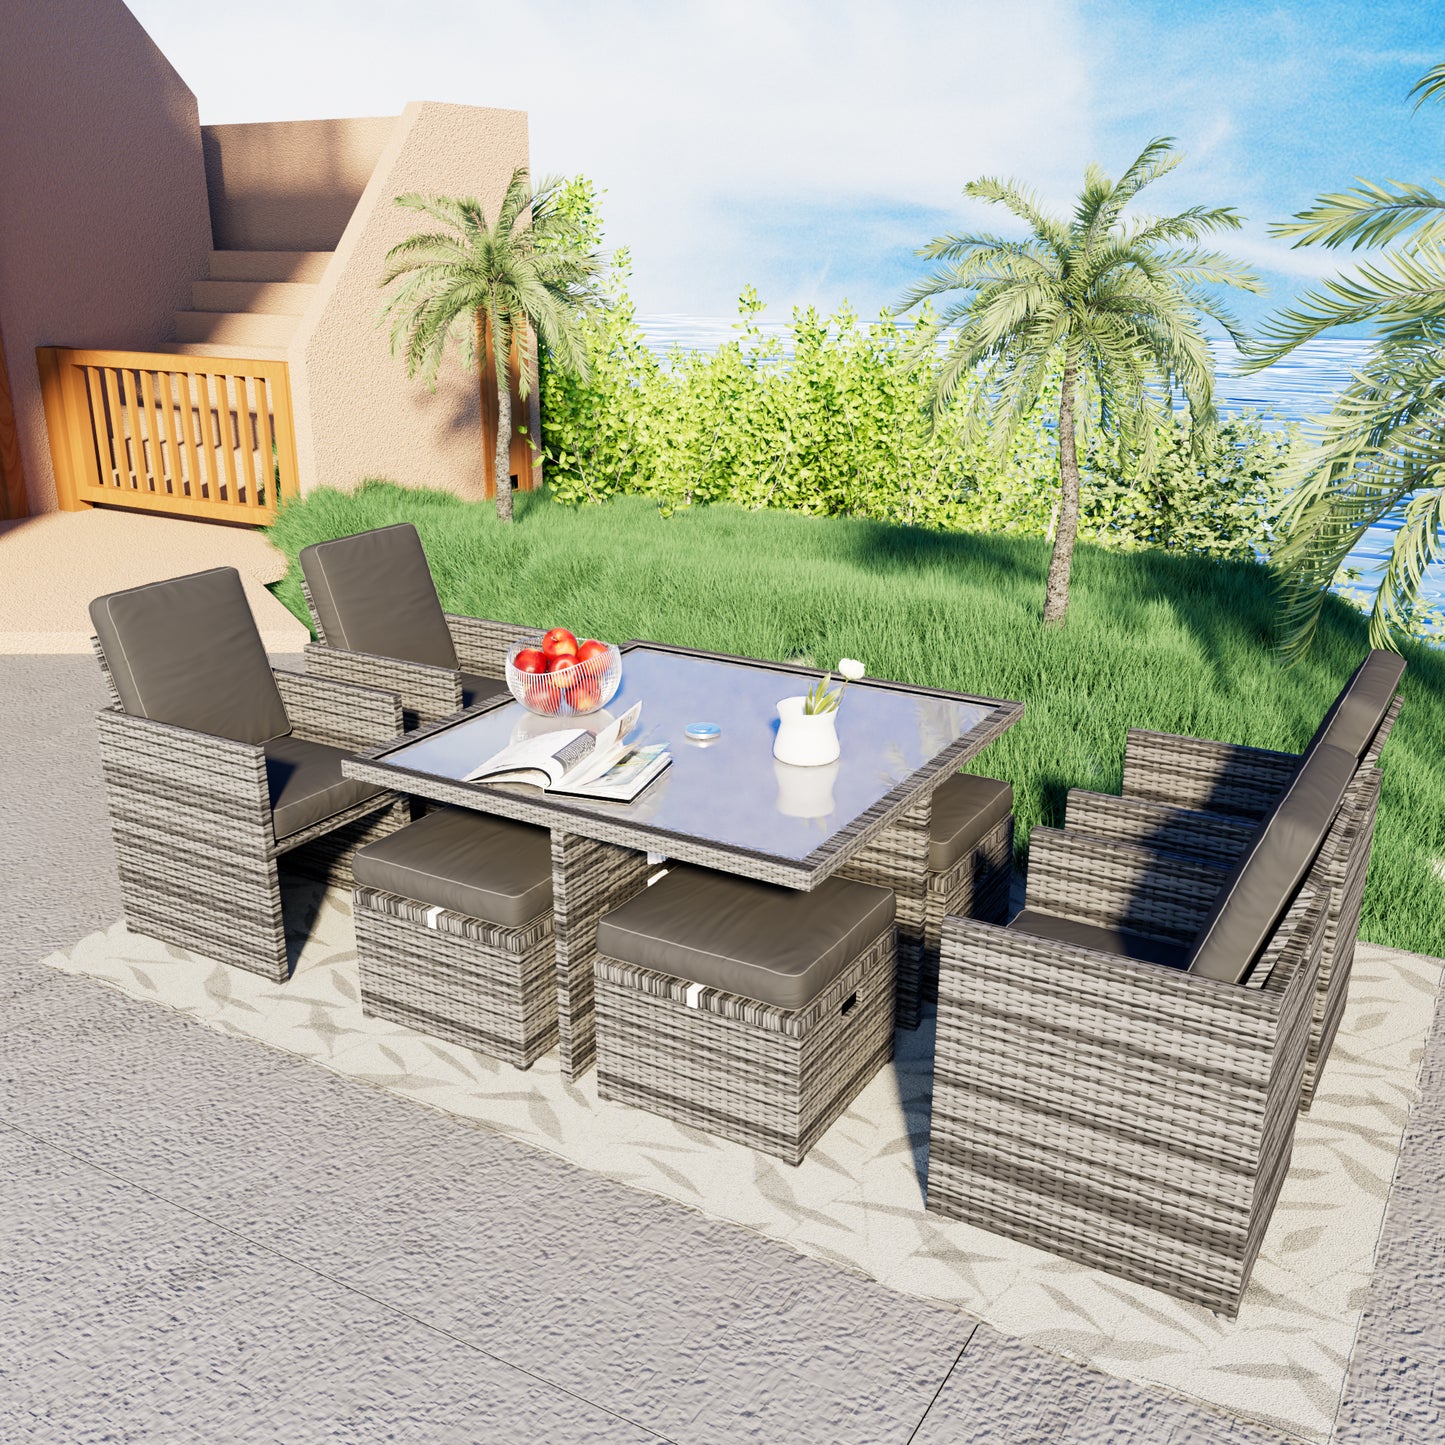 9 all-weather PE rattan terrace outdoor dining dialogue combination, equipped with coffee table, chair, foot mat storage, detachable cushion (grey rattan, dark grey cushion)